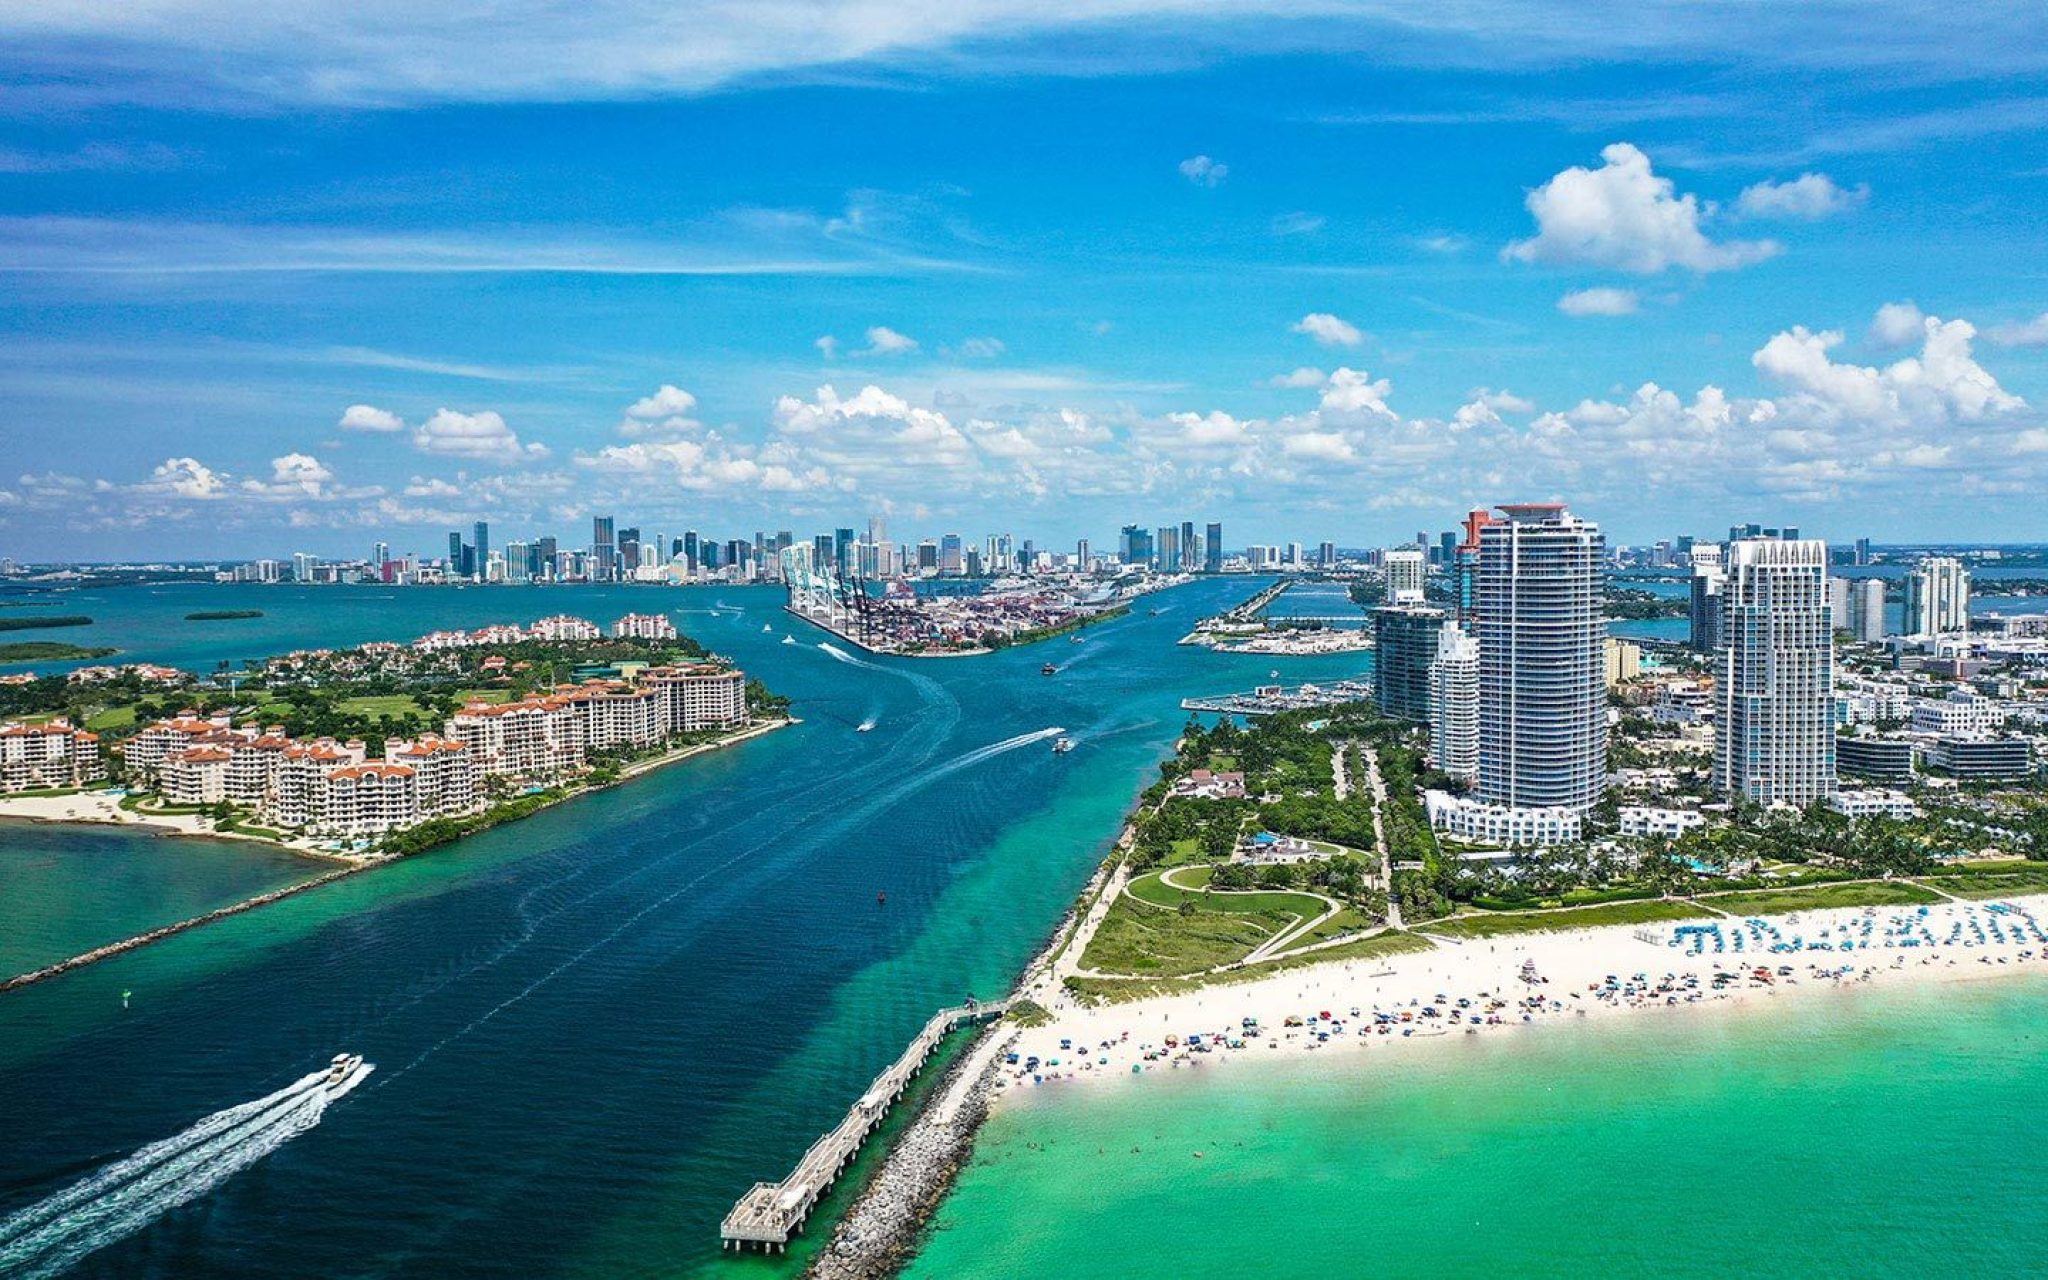 miami trip packages